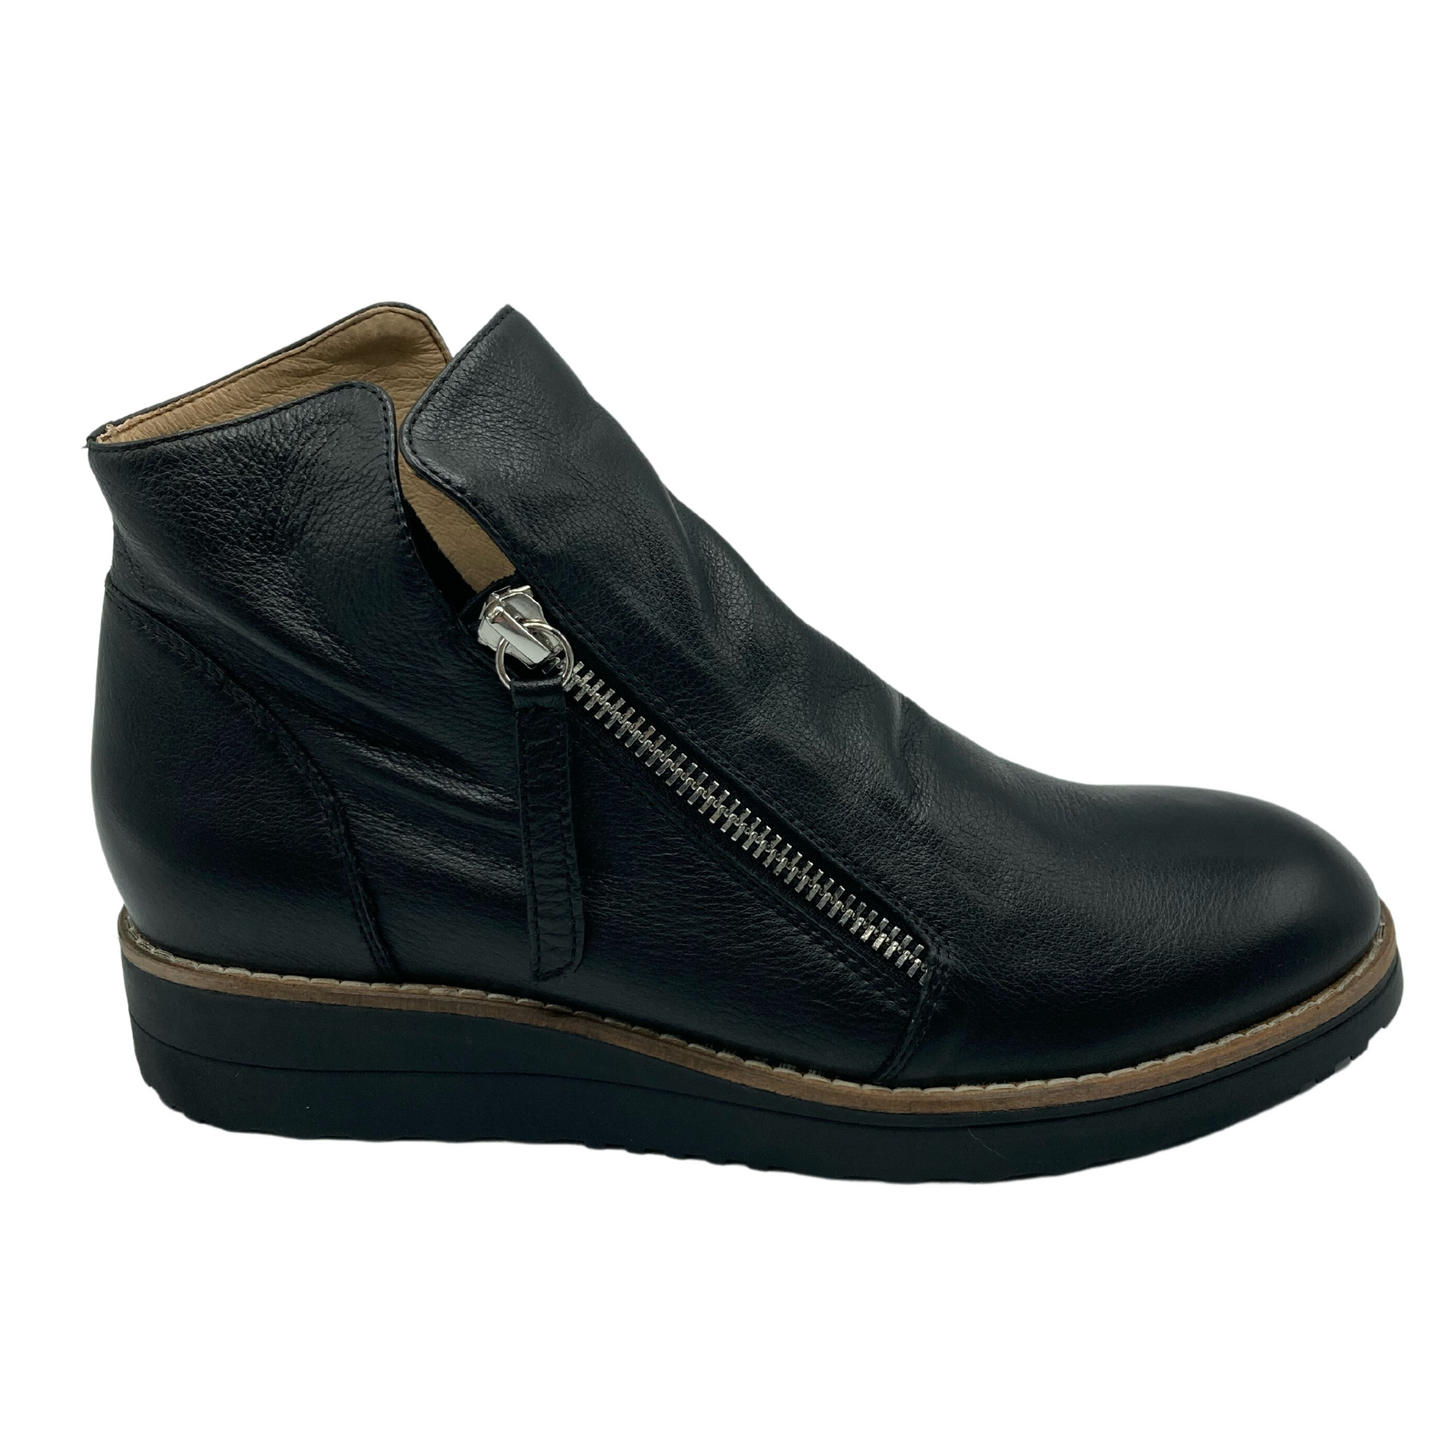 Right facing profile view of a black leather short boot with silver zipper and black rubber sole